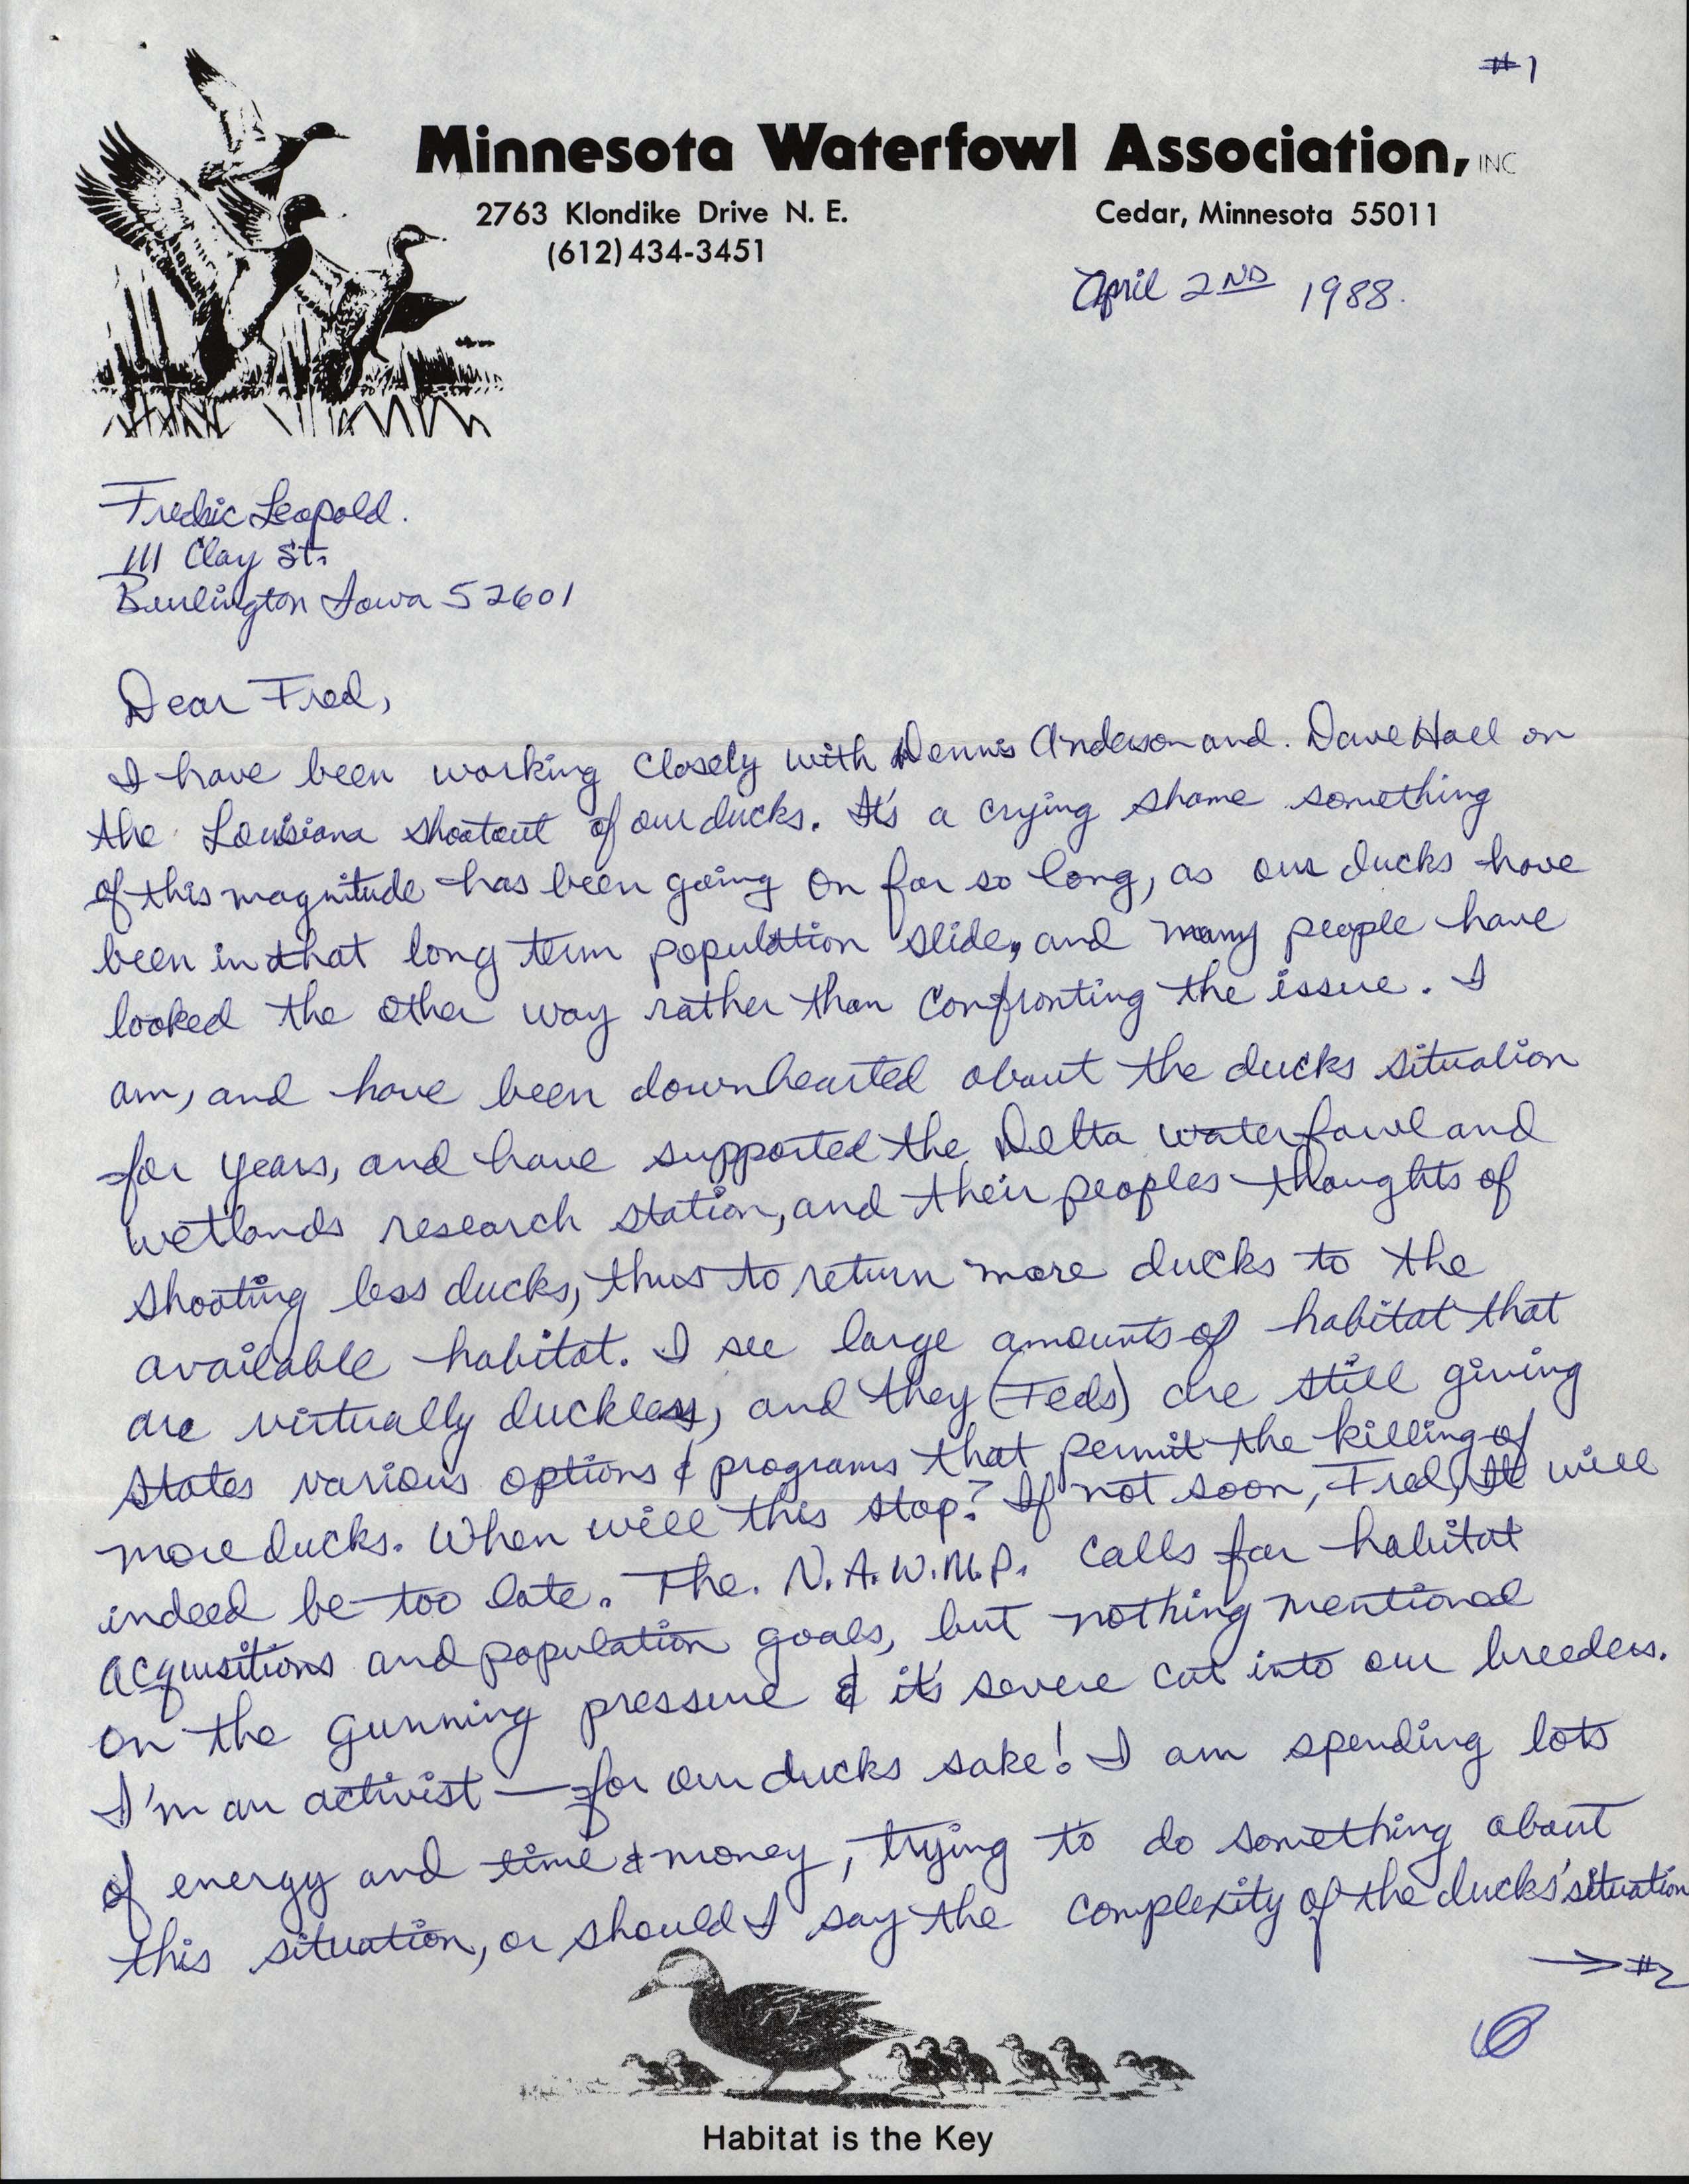 Bill Gombold letter to Frederic Leopold regarding duck conservation, April 2, 1988